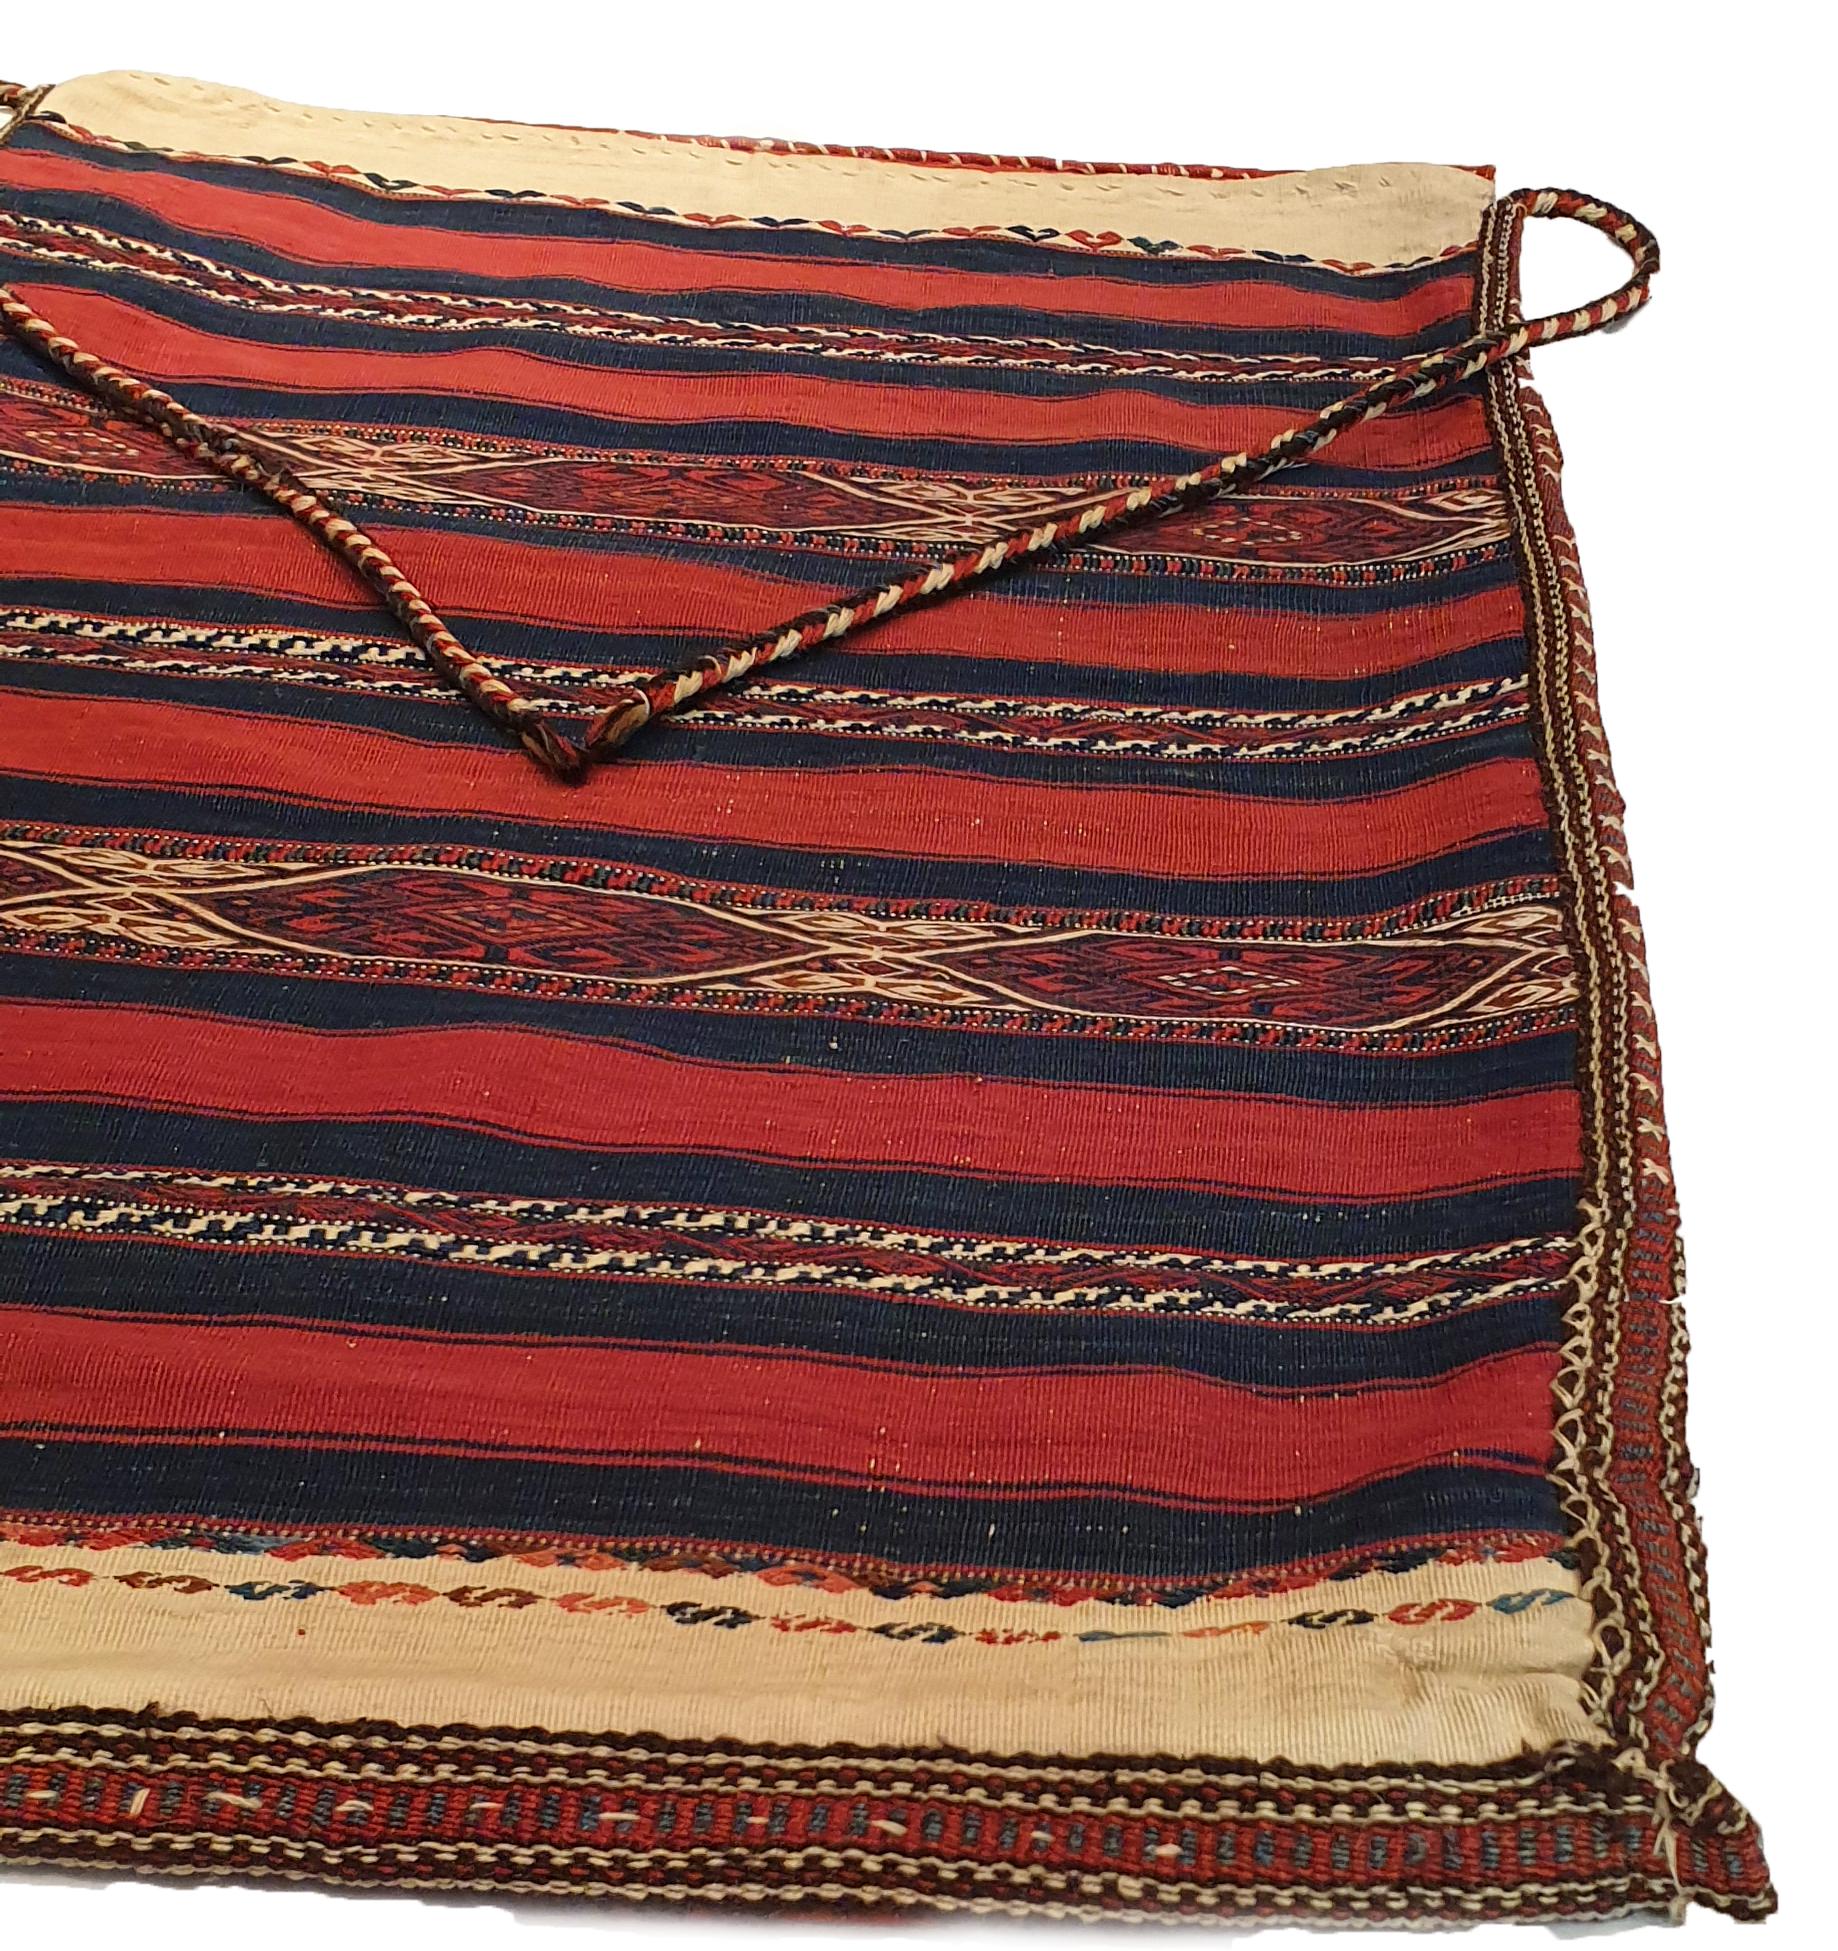 692 - exceptional 19th century Caucasian bag. Very fine weaving.